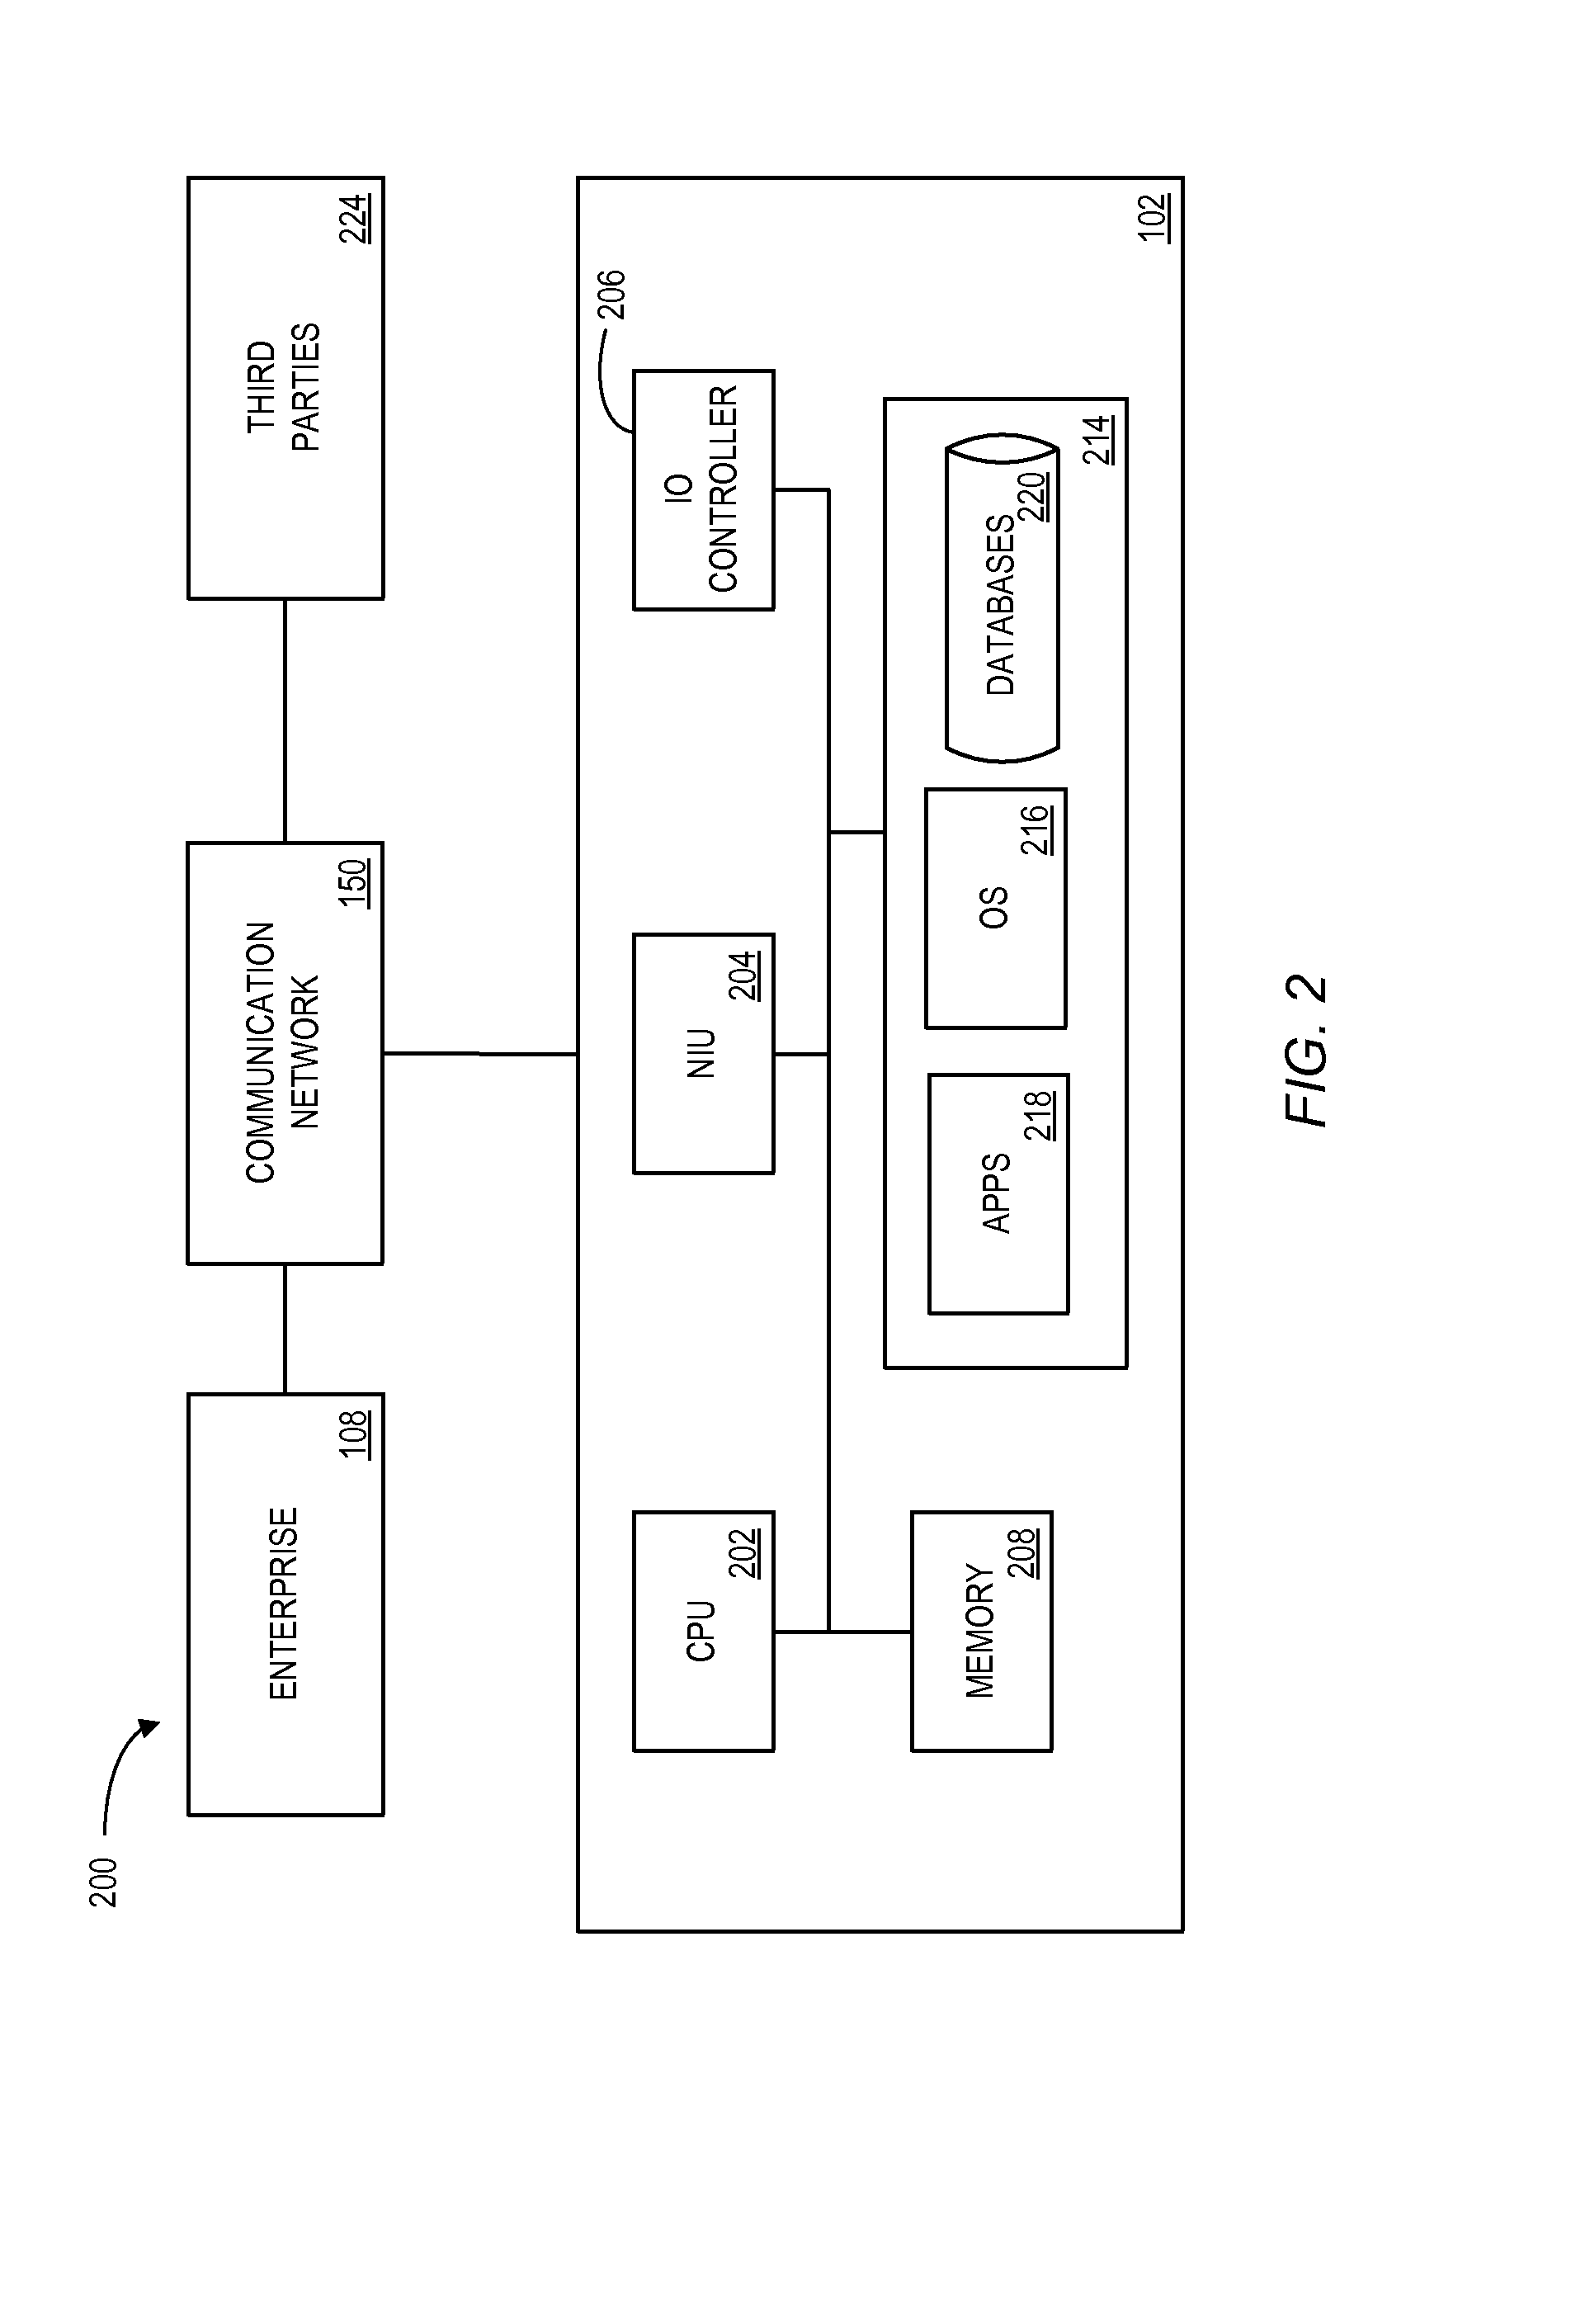 System and method to dynamically allocate water savings amounts for remote water devices